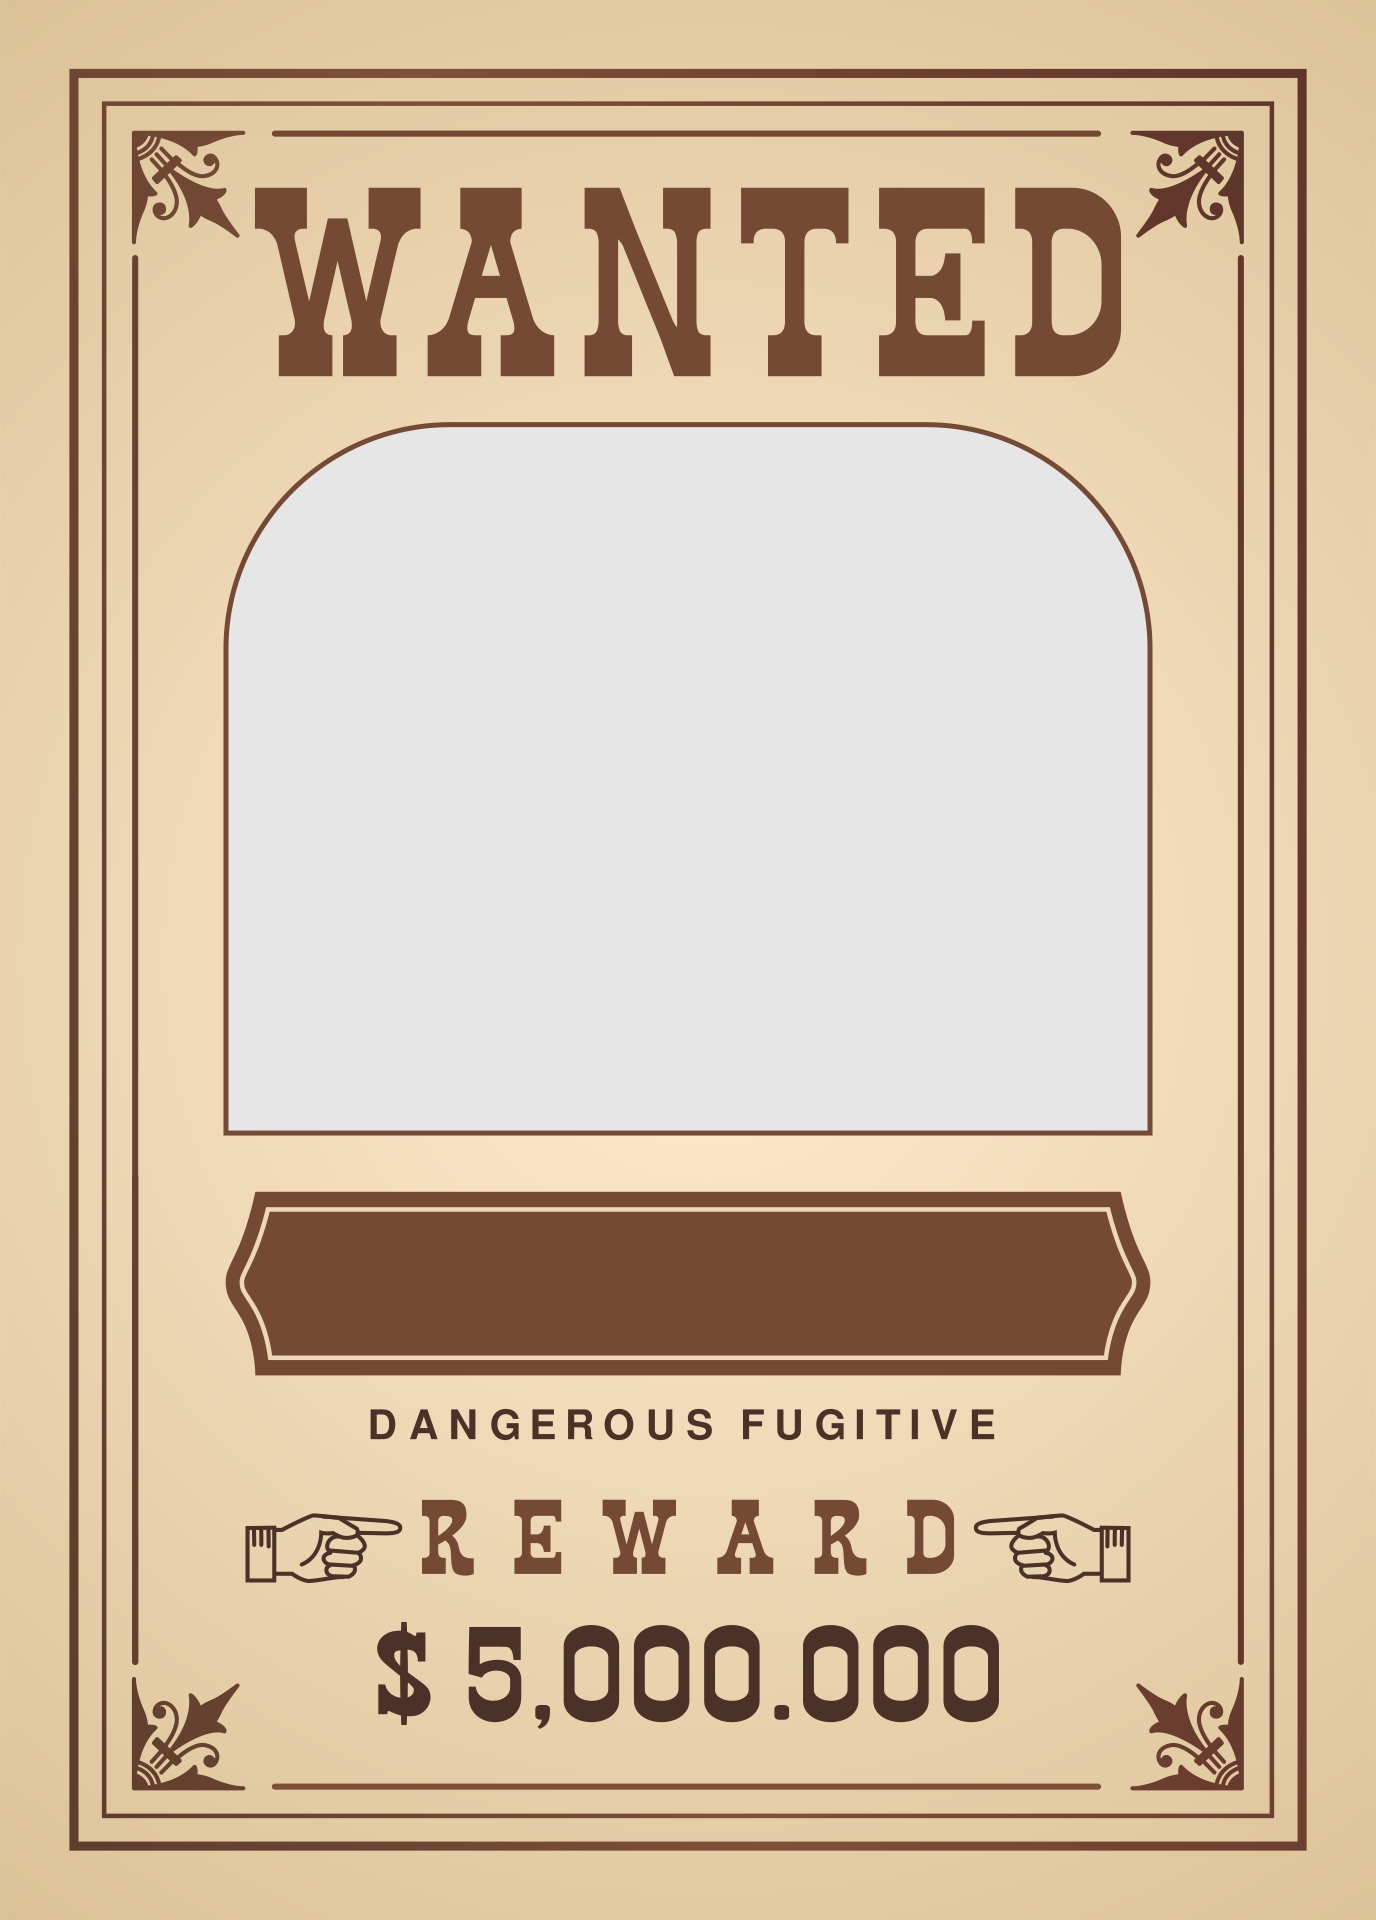 Printable Old West Wanted Posters_21954